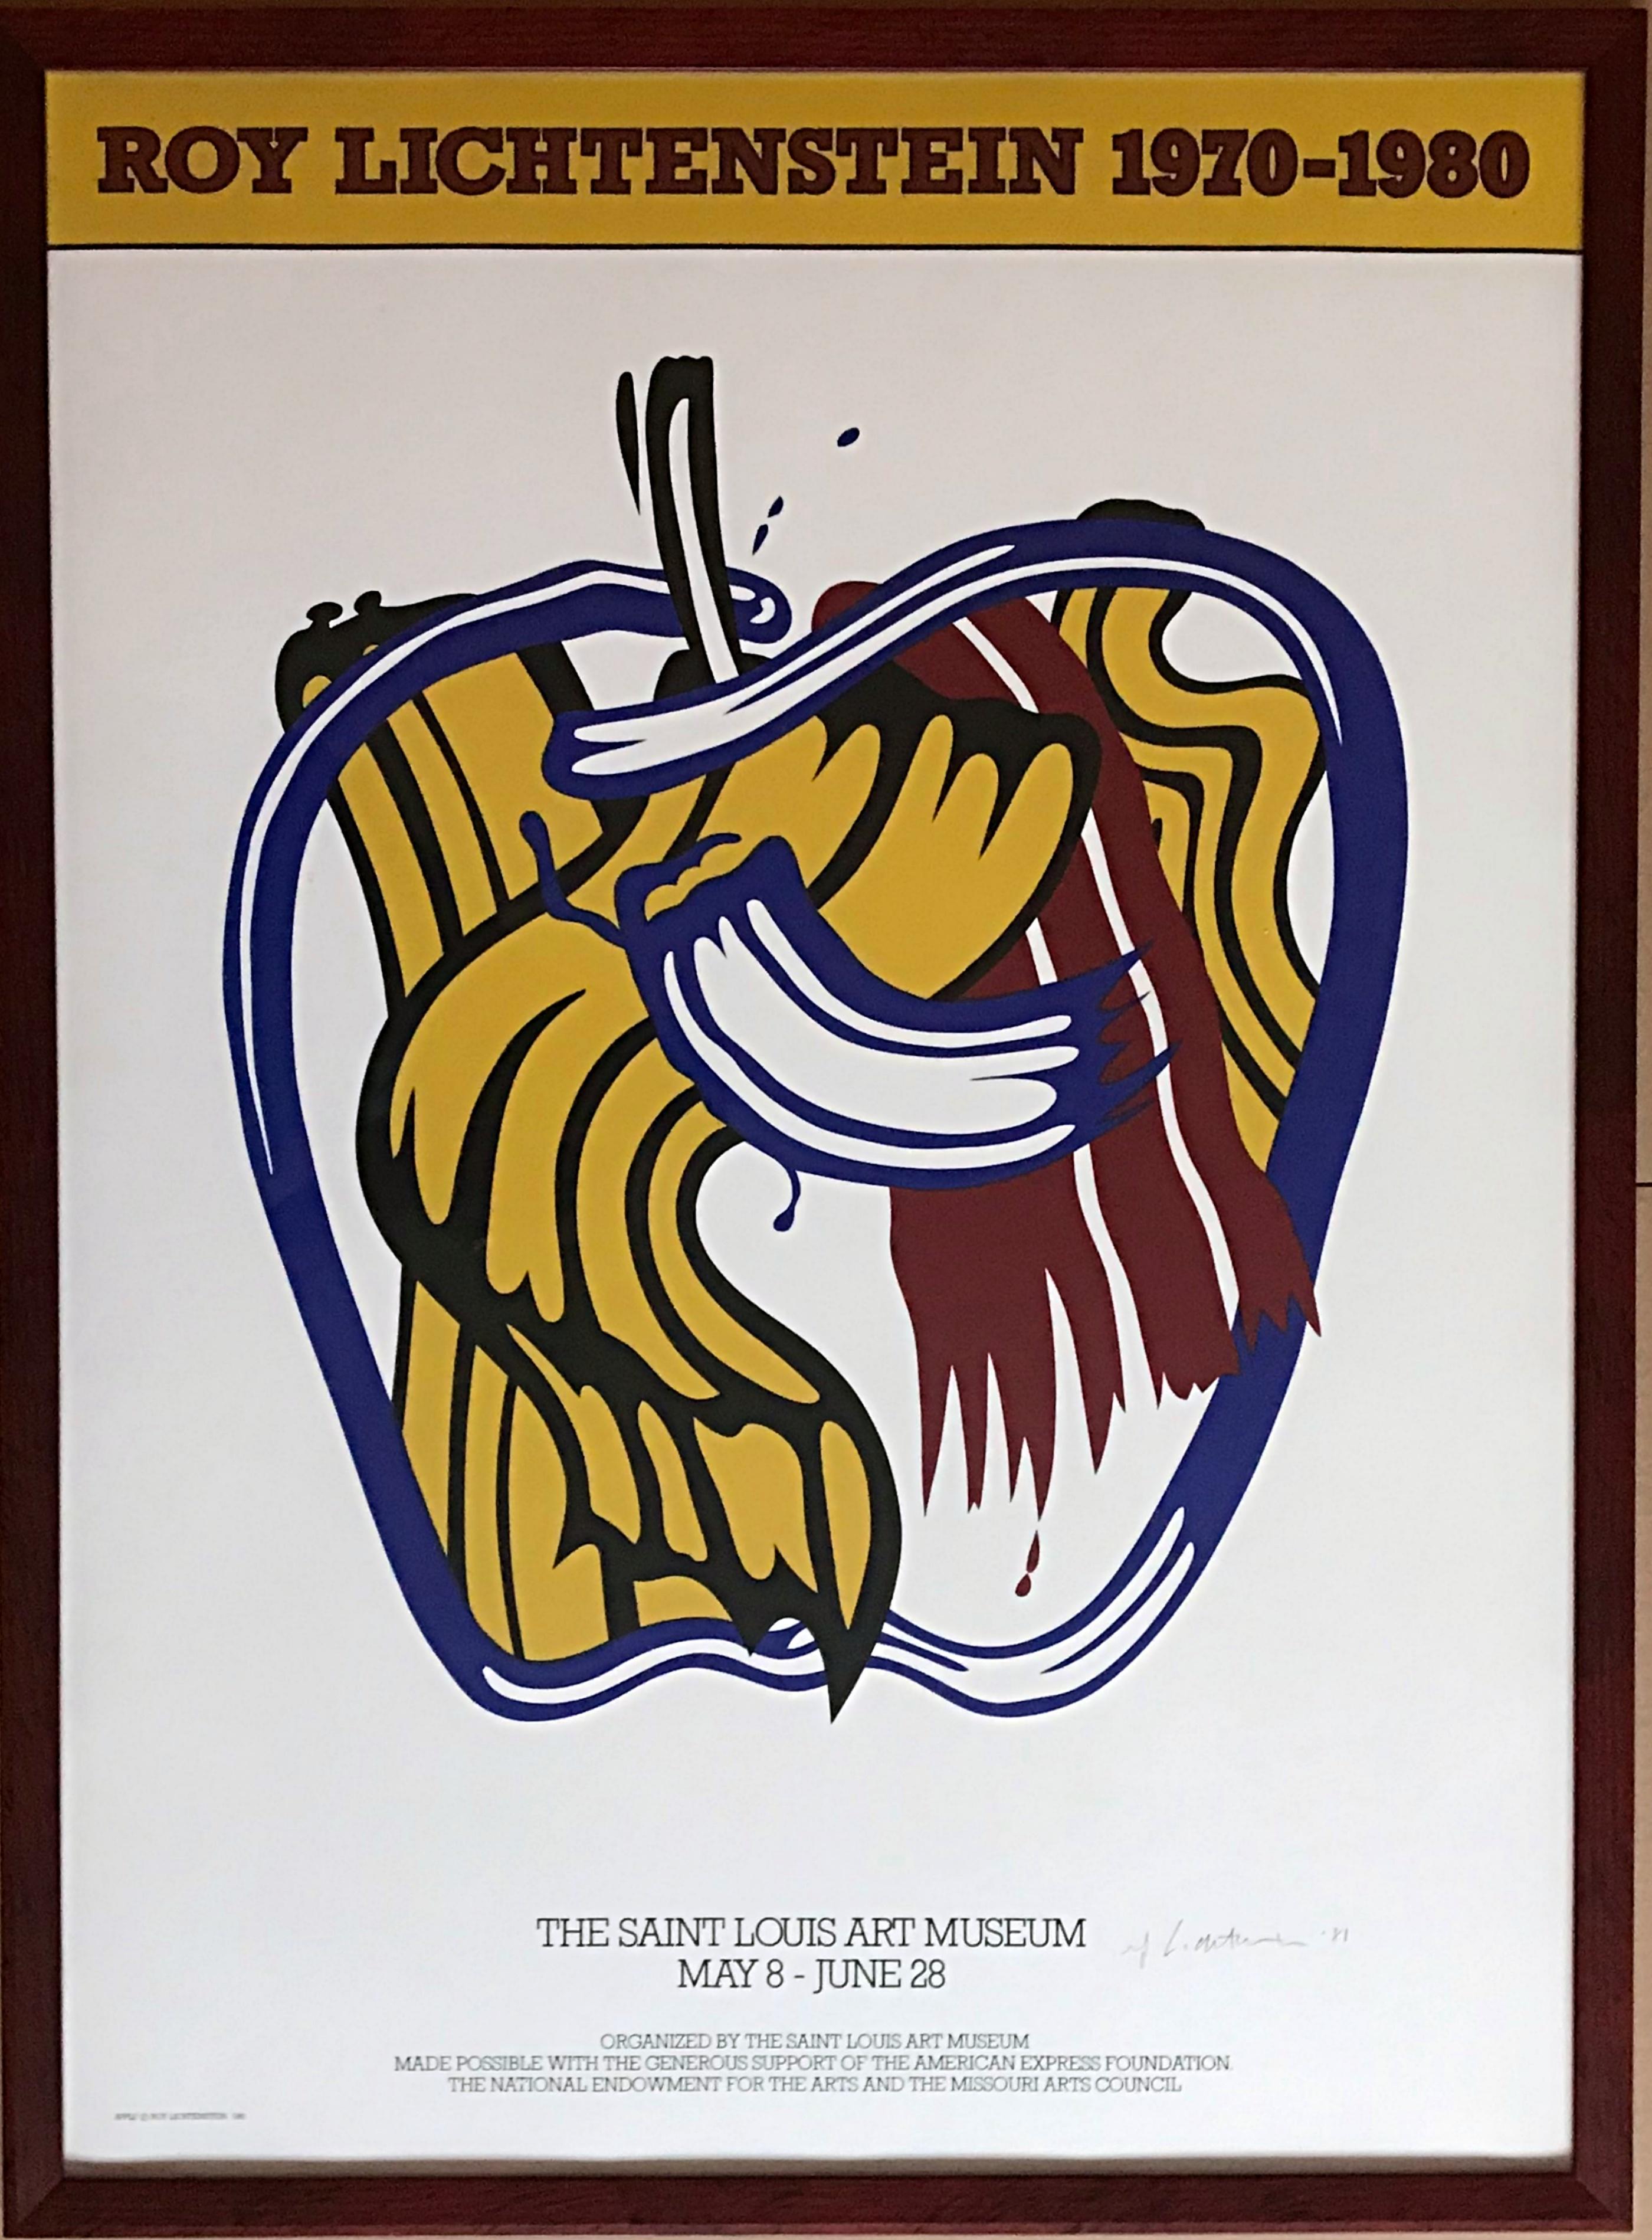 Roy Lichtenstein 1970-1980 (Hand Signed and dated by Roy Lichtenstein), 1981
Offset lithograph. Hand signed and dated in ink
Hand-signed by artist, Hand signed and dated in ink on the front.
One of only 100 the artist signed in 1981 for the St.